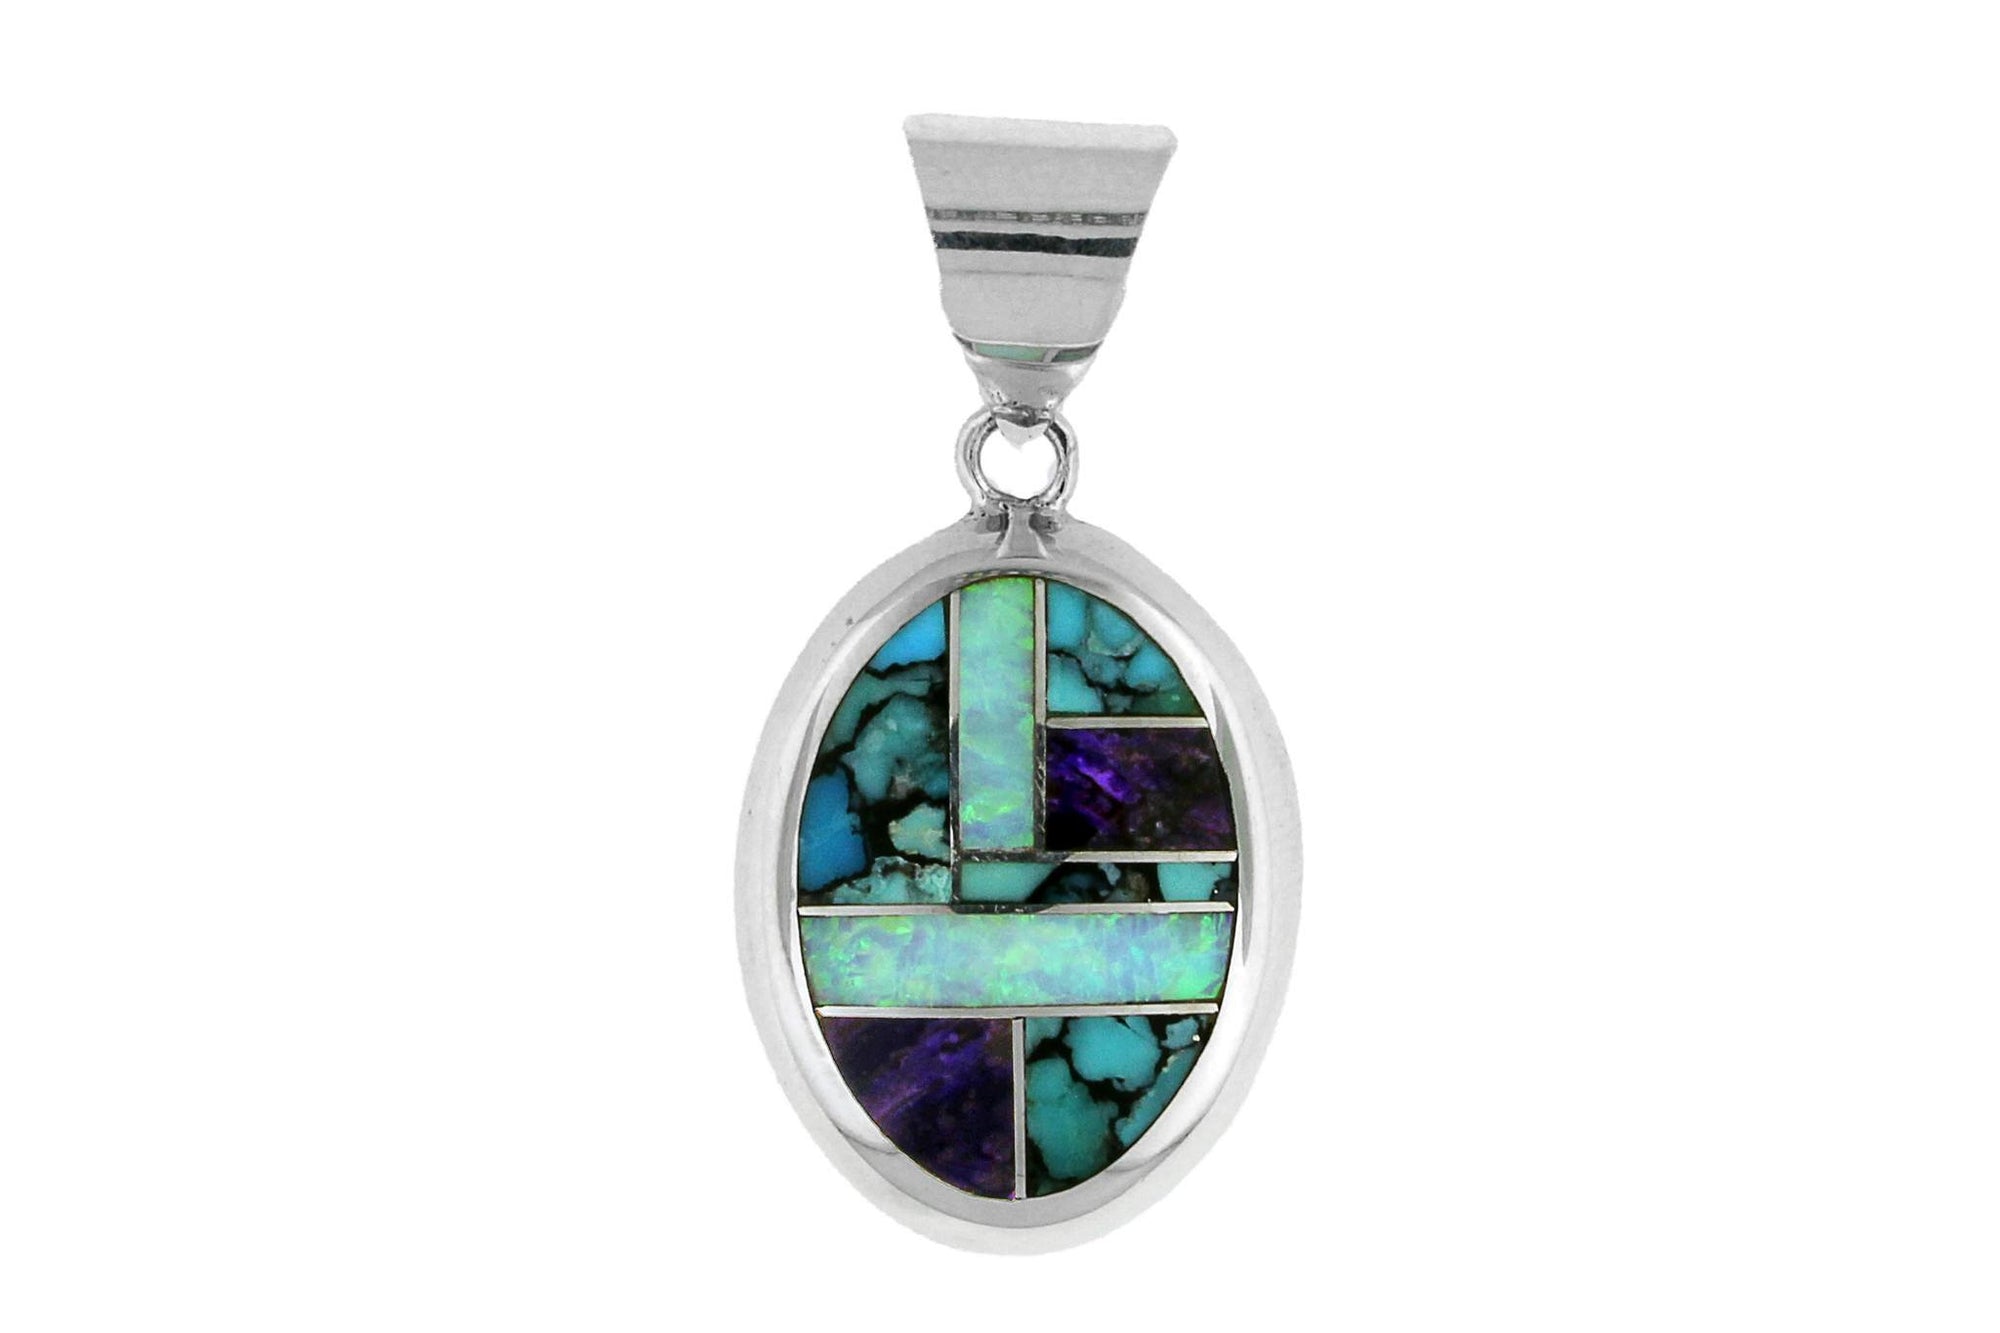 Native American Jewelry - David Rosales Turquoise and Opal Pendant